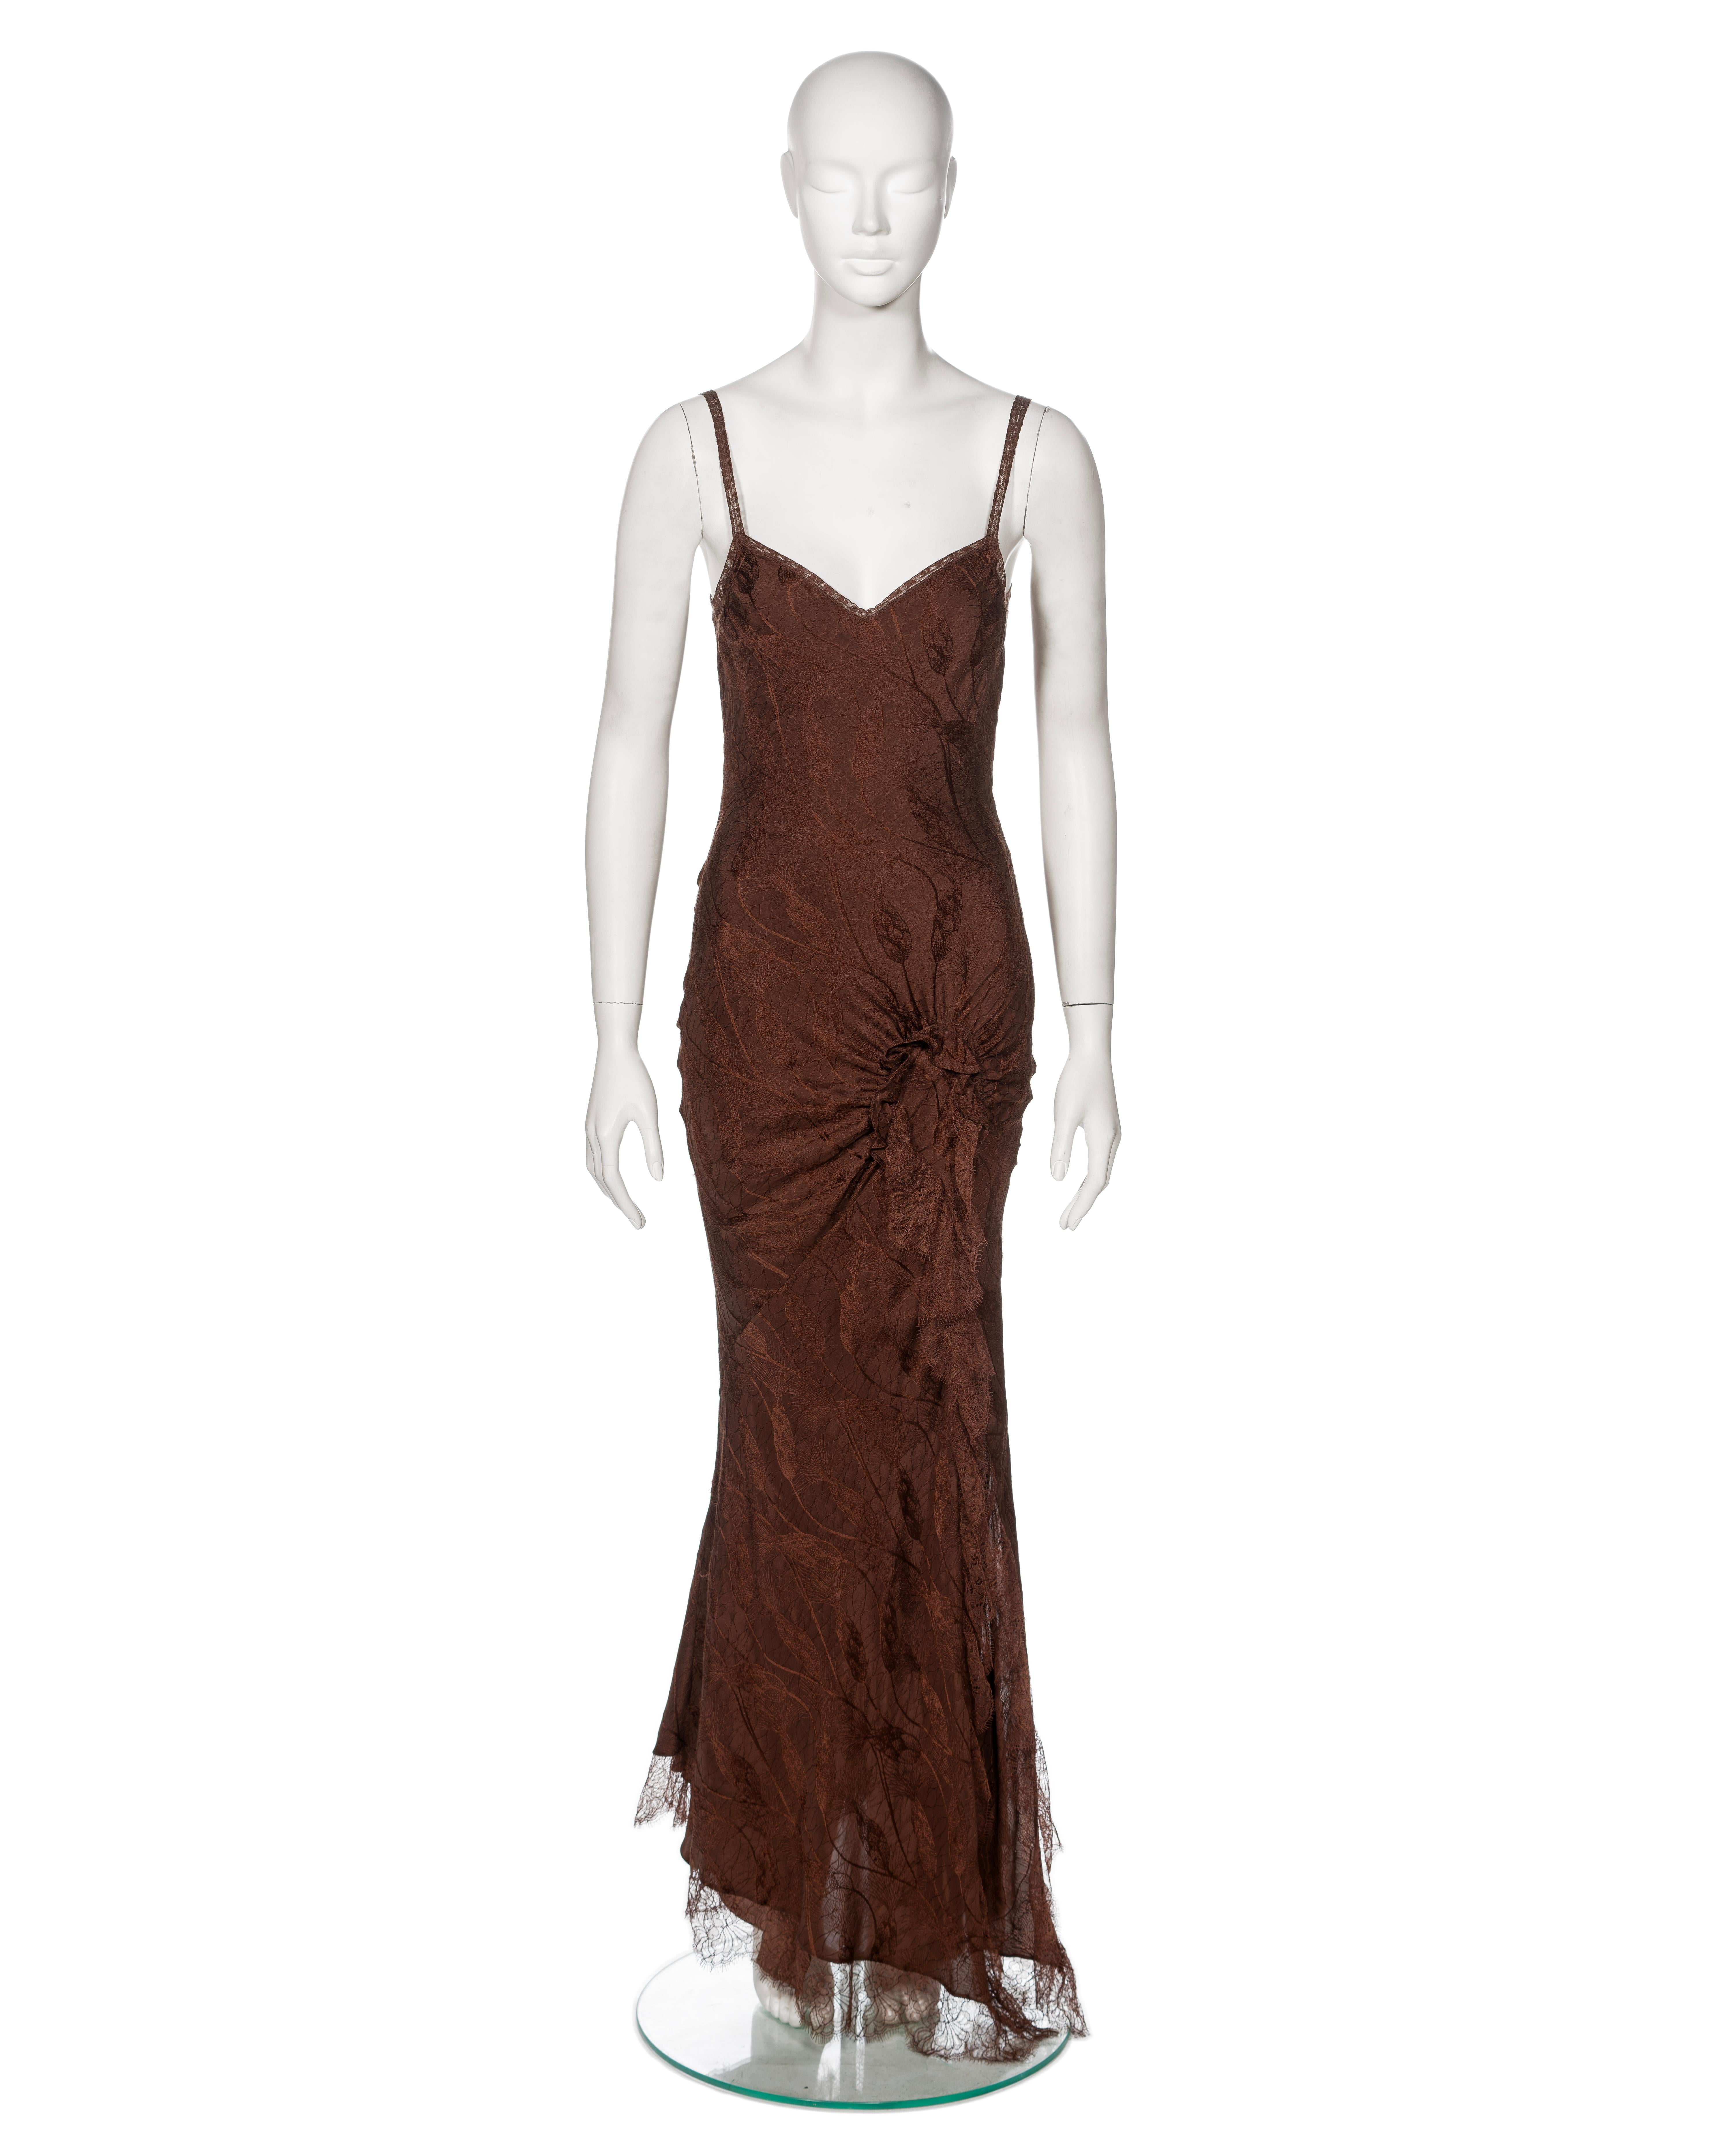 ▪ Brand: John Galliano
▪ Creative Director: John Galliano
▪ Collection: Fall-Winter 2005
▪ Fabric: Brown Silk, Cotton, Tactel, Nylon
▪ Size: FR38 - UK10 - IT42
▪ Made in: France
▪ Condition: Very Good
▪ Mannequin: 183 cm / 6ft